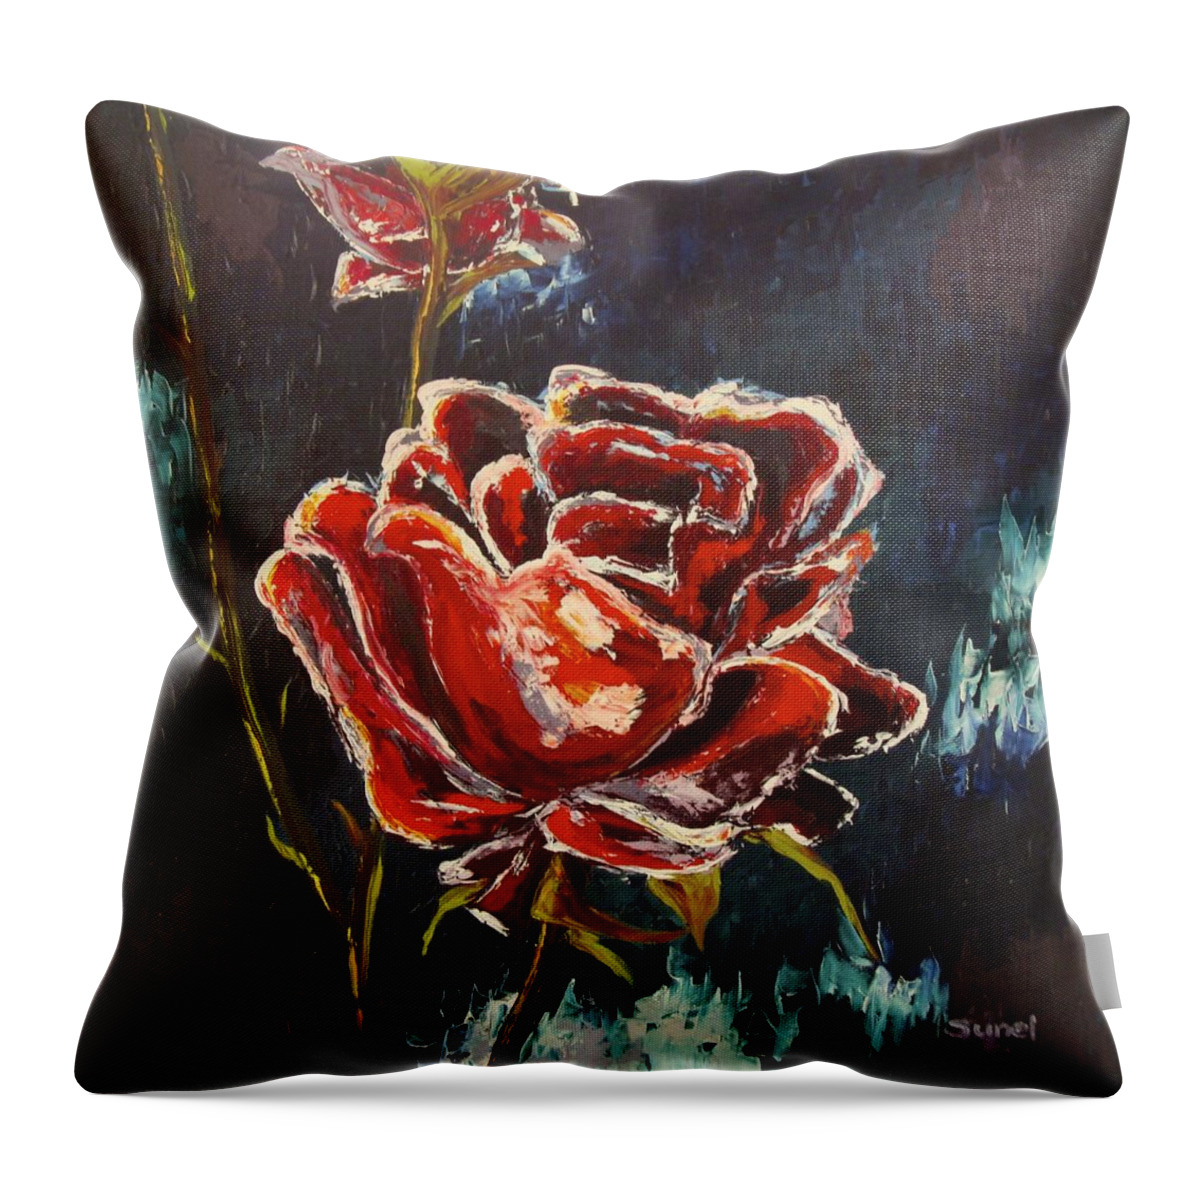 Rose Throw Pillow featuring the painting Roses are red by Sunel De Lange